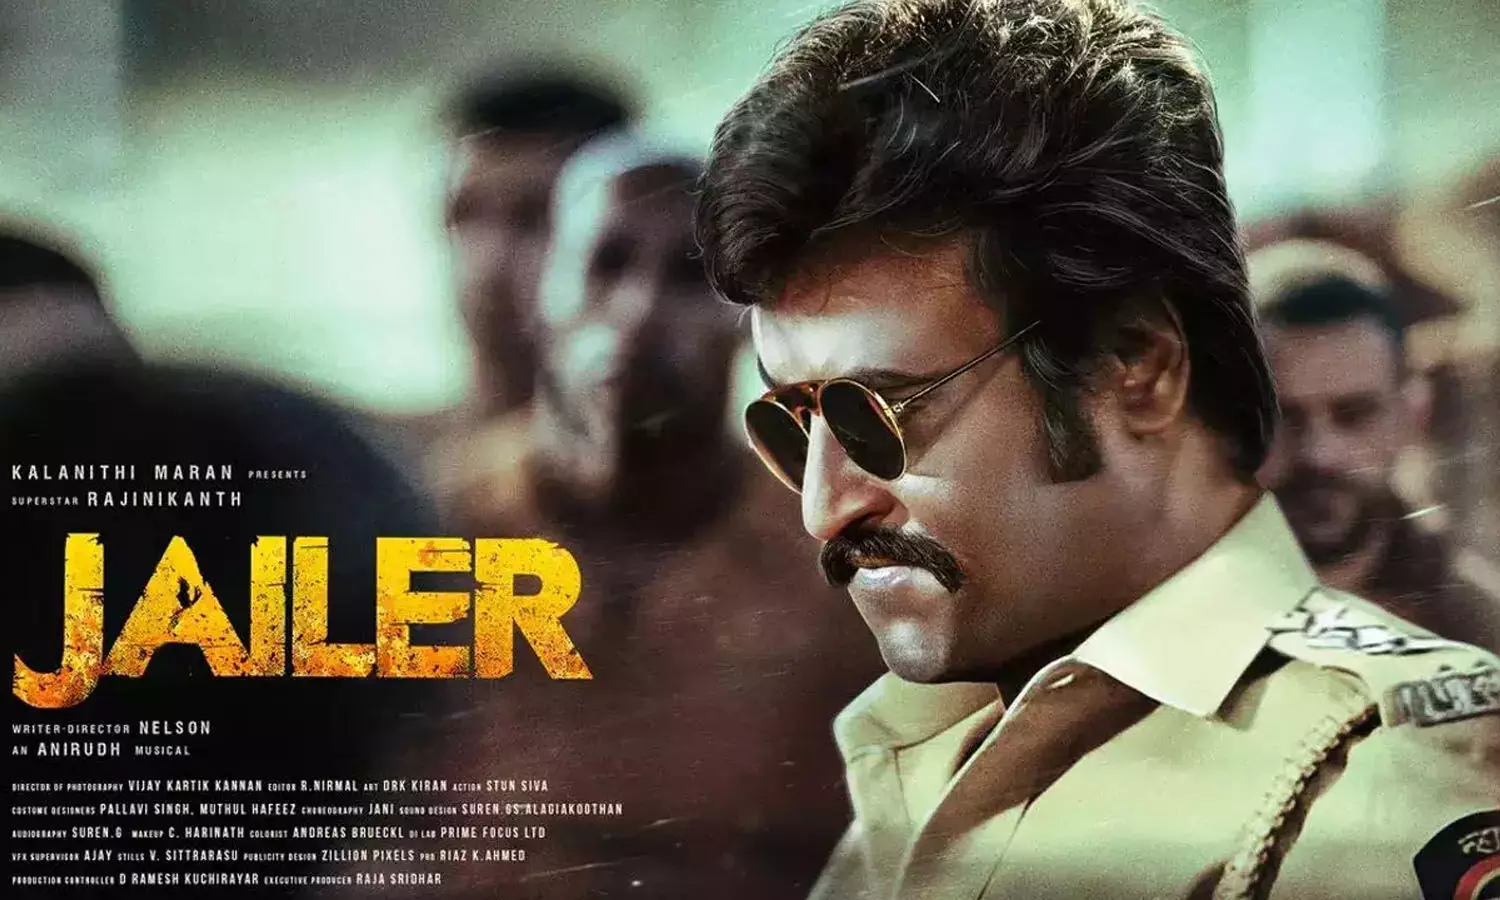 Rajinikanths Jailer Storms the US Box Office with Impressive Collections